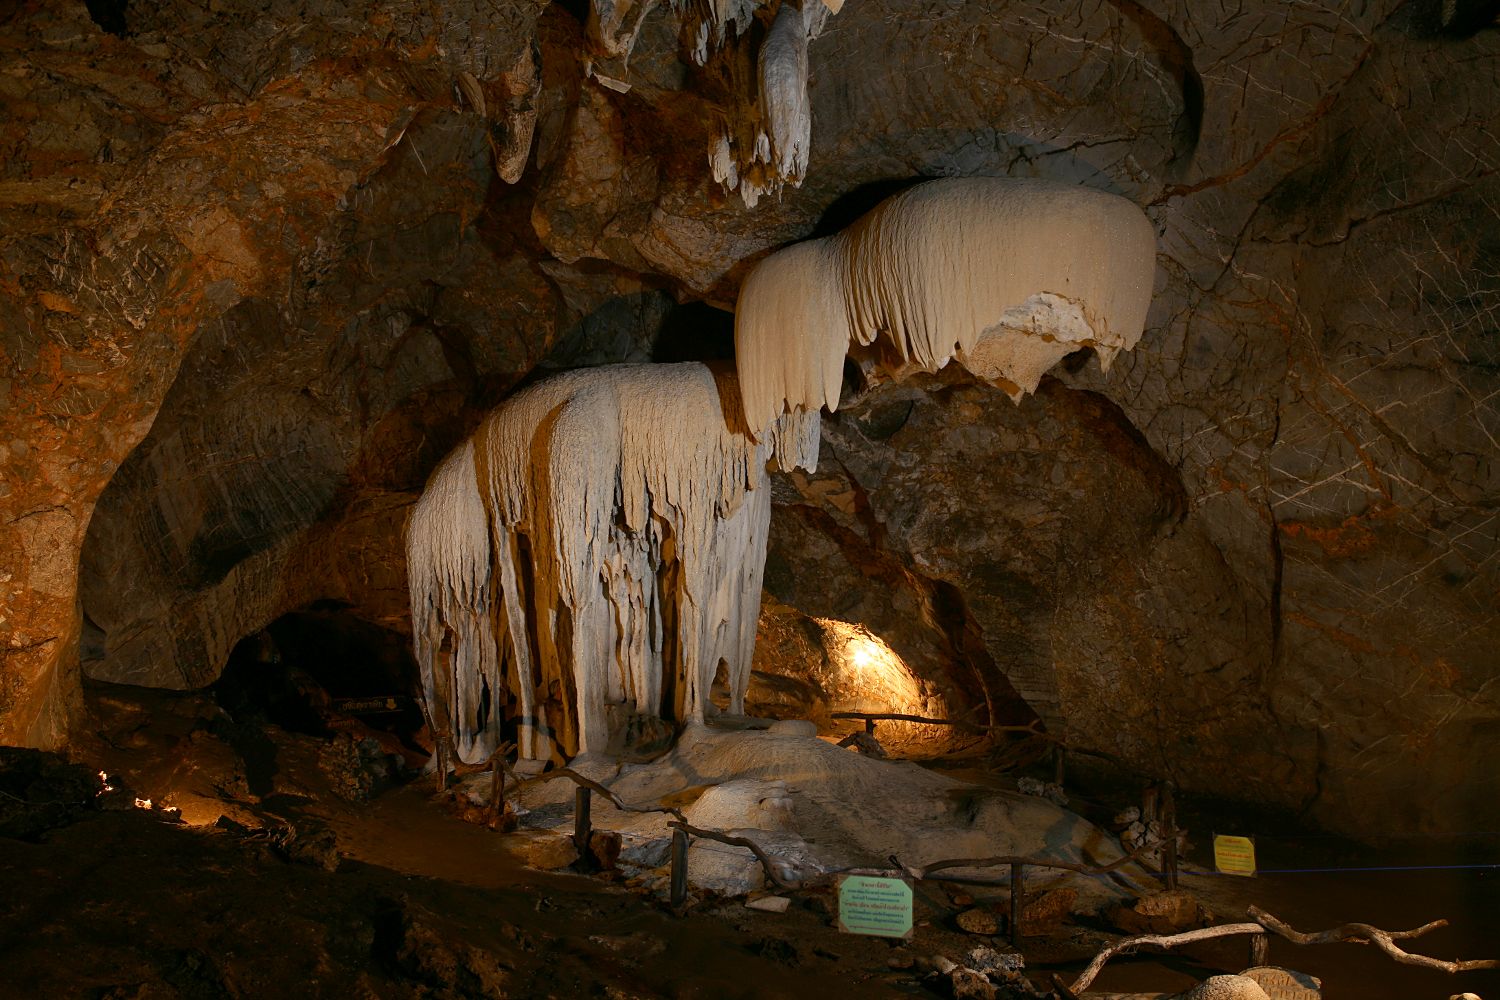 some ice hanging on the side of the cave